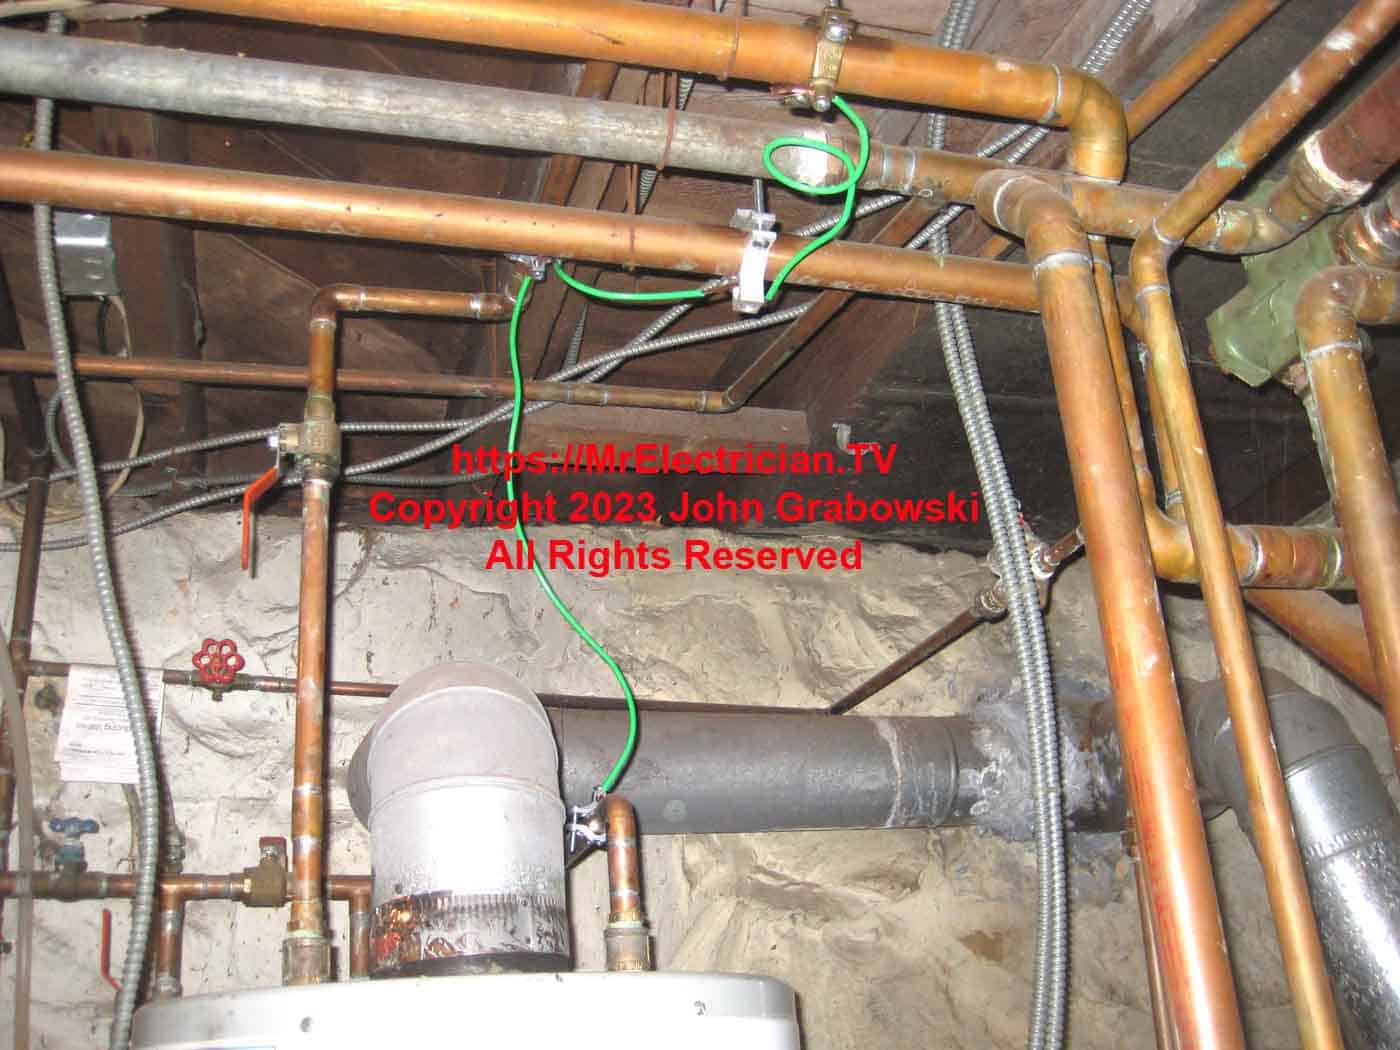 Water pipe bonding of the heating system copper pipes using water pipe ground clamps and number 4 green copper wire